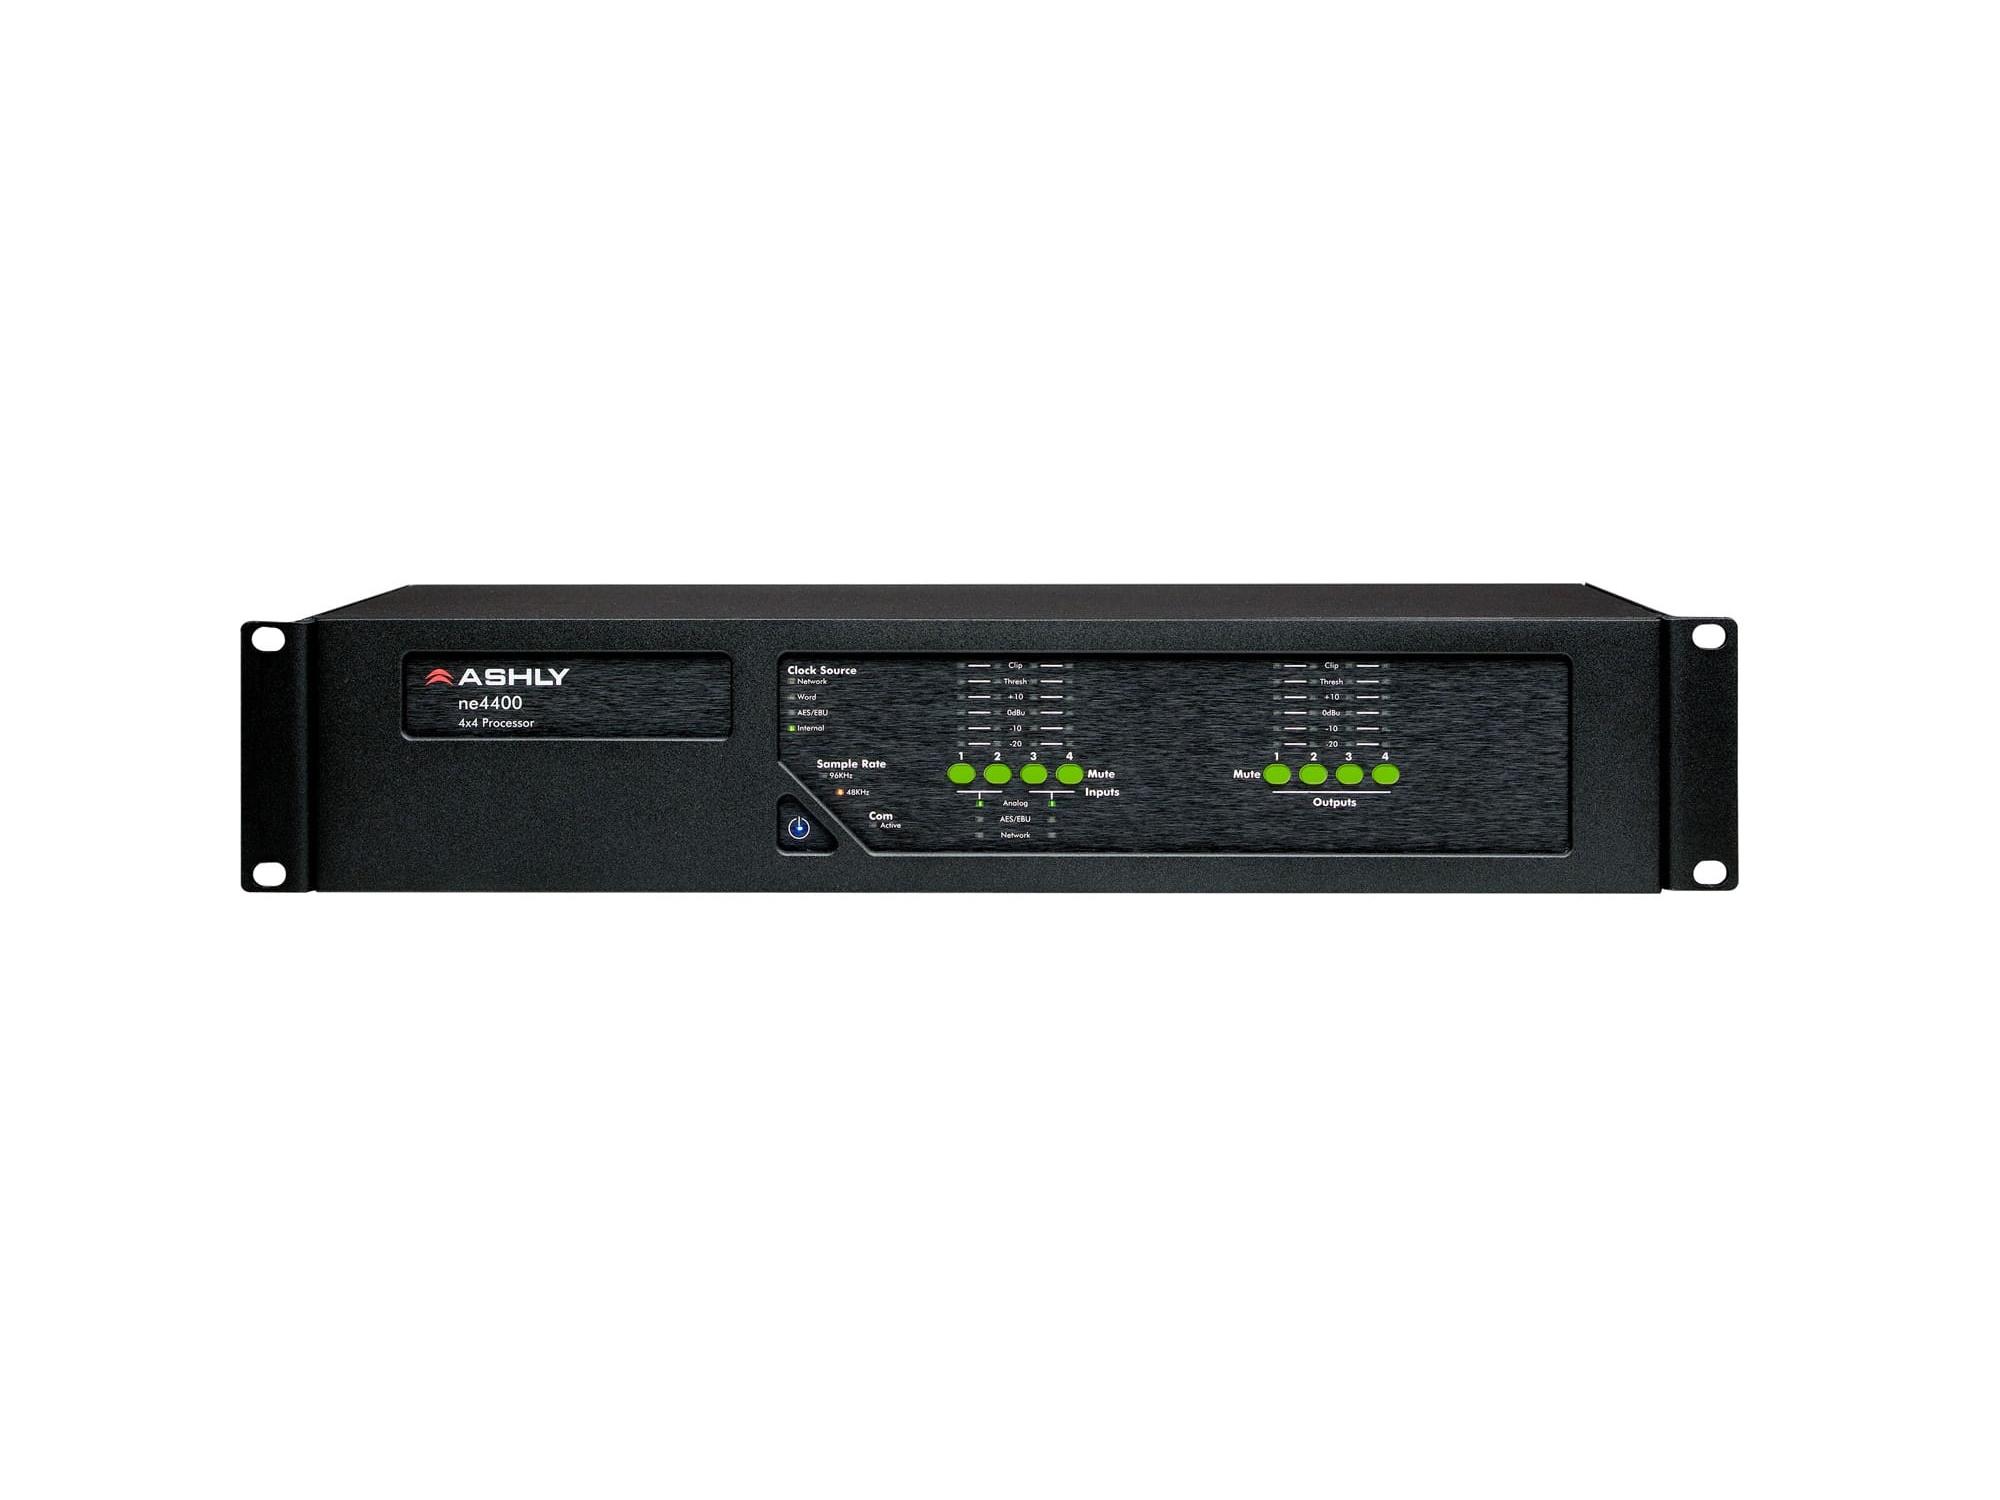 ne4400d Protea DSP Audio System Processor 4x4 I/O with 4-Channel AES3 Inputs by Ashly